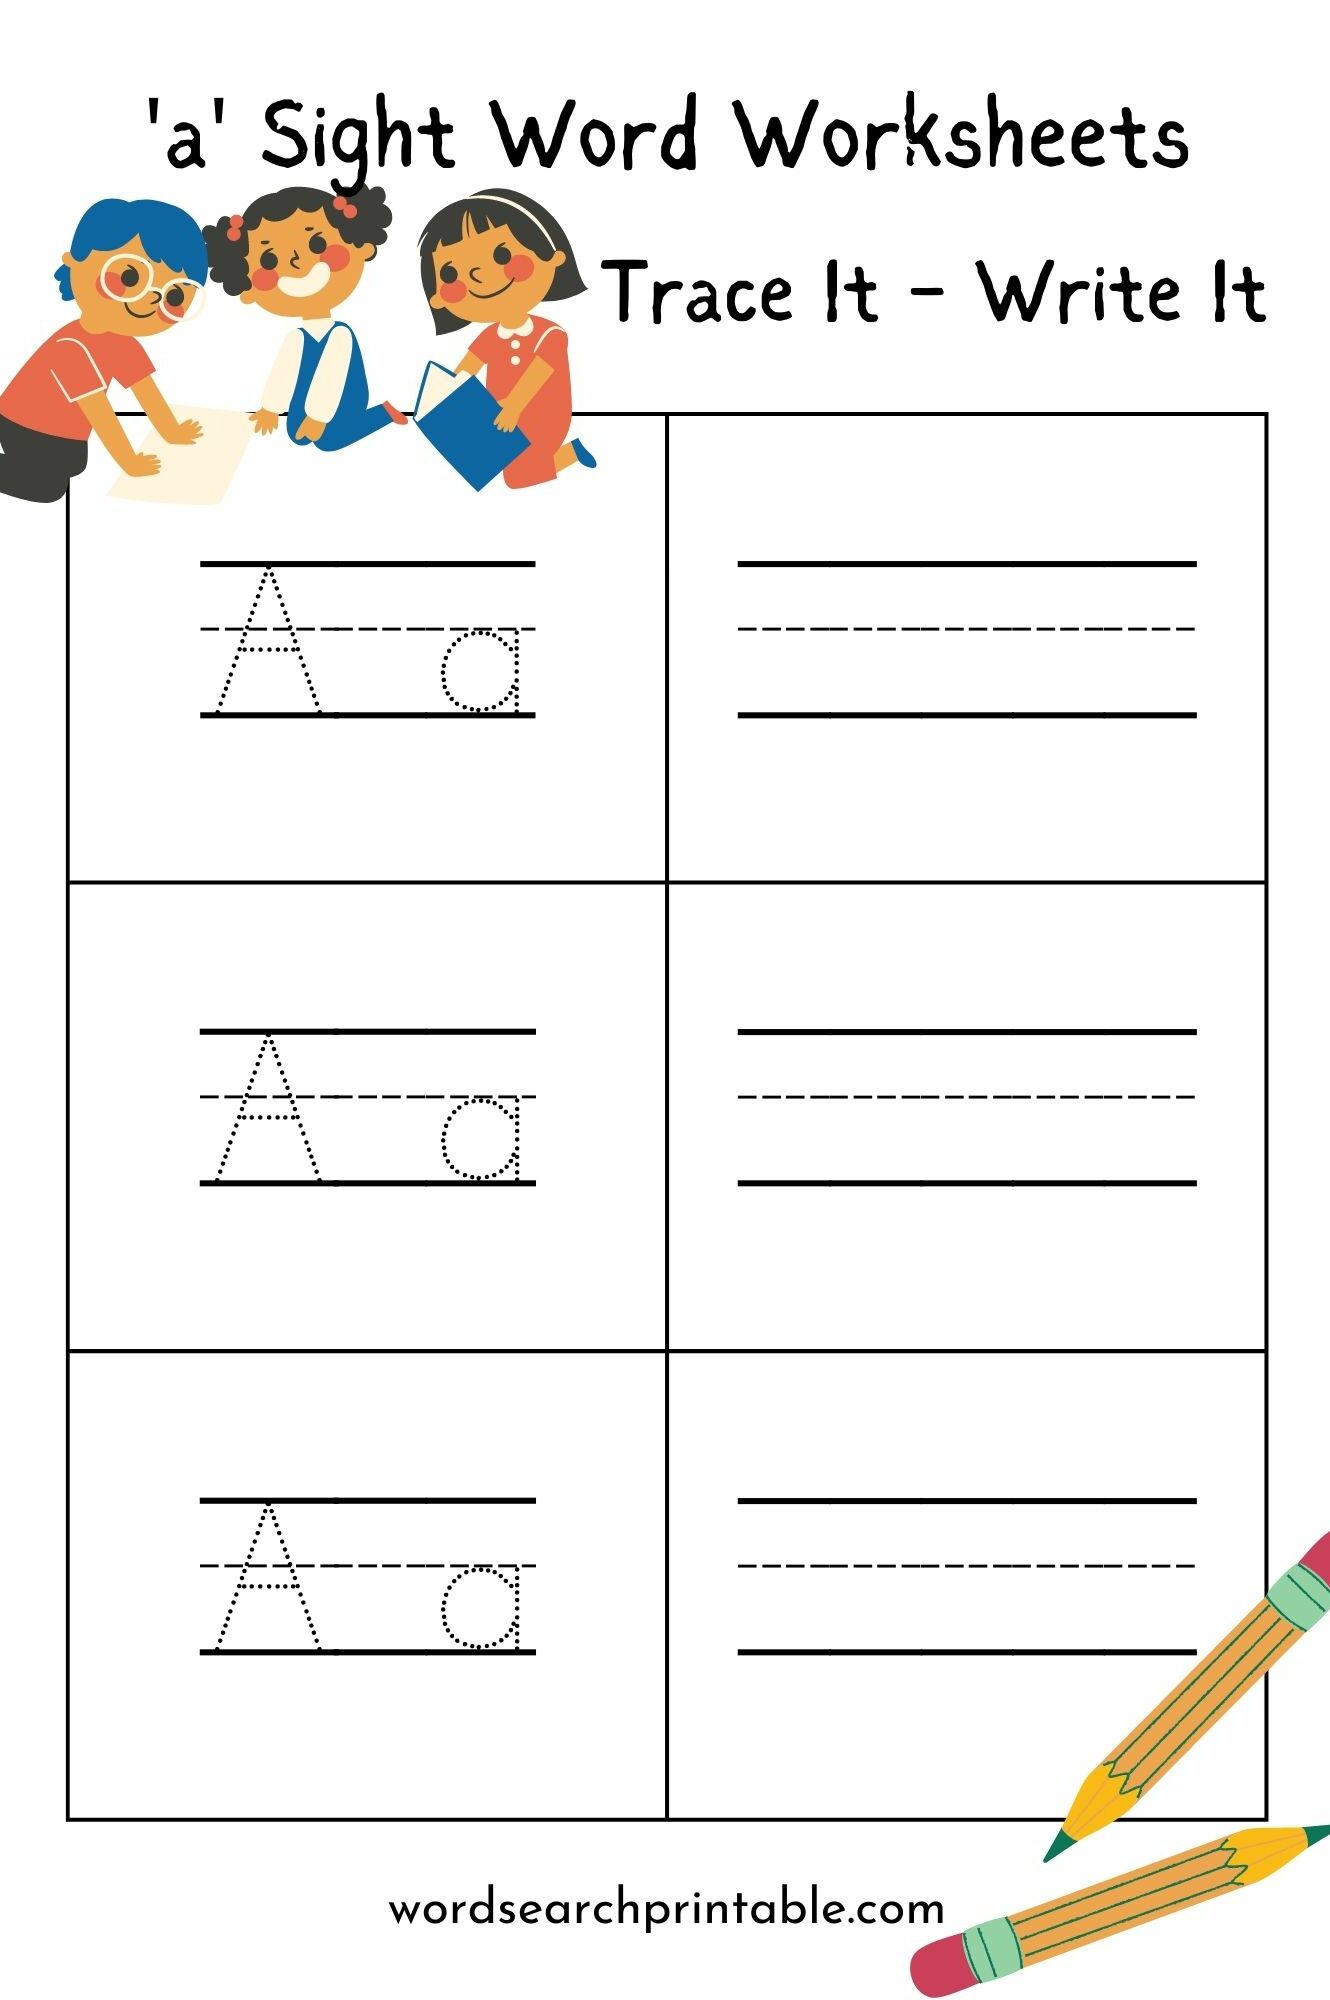 A Trace It Worksheet